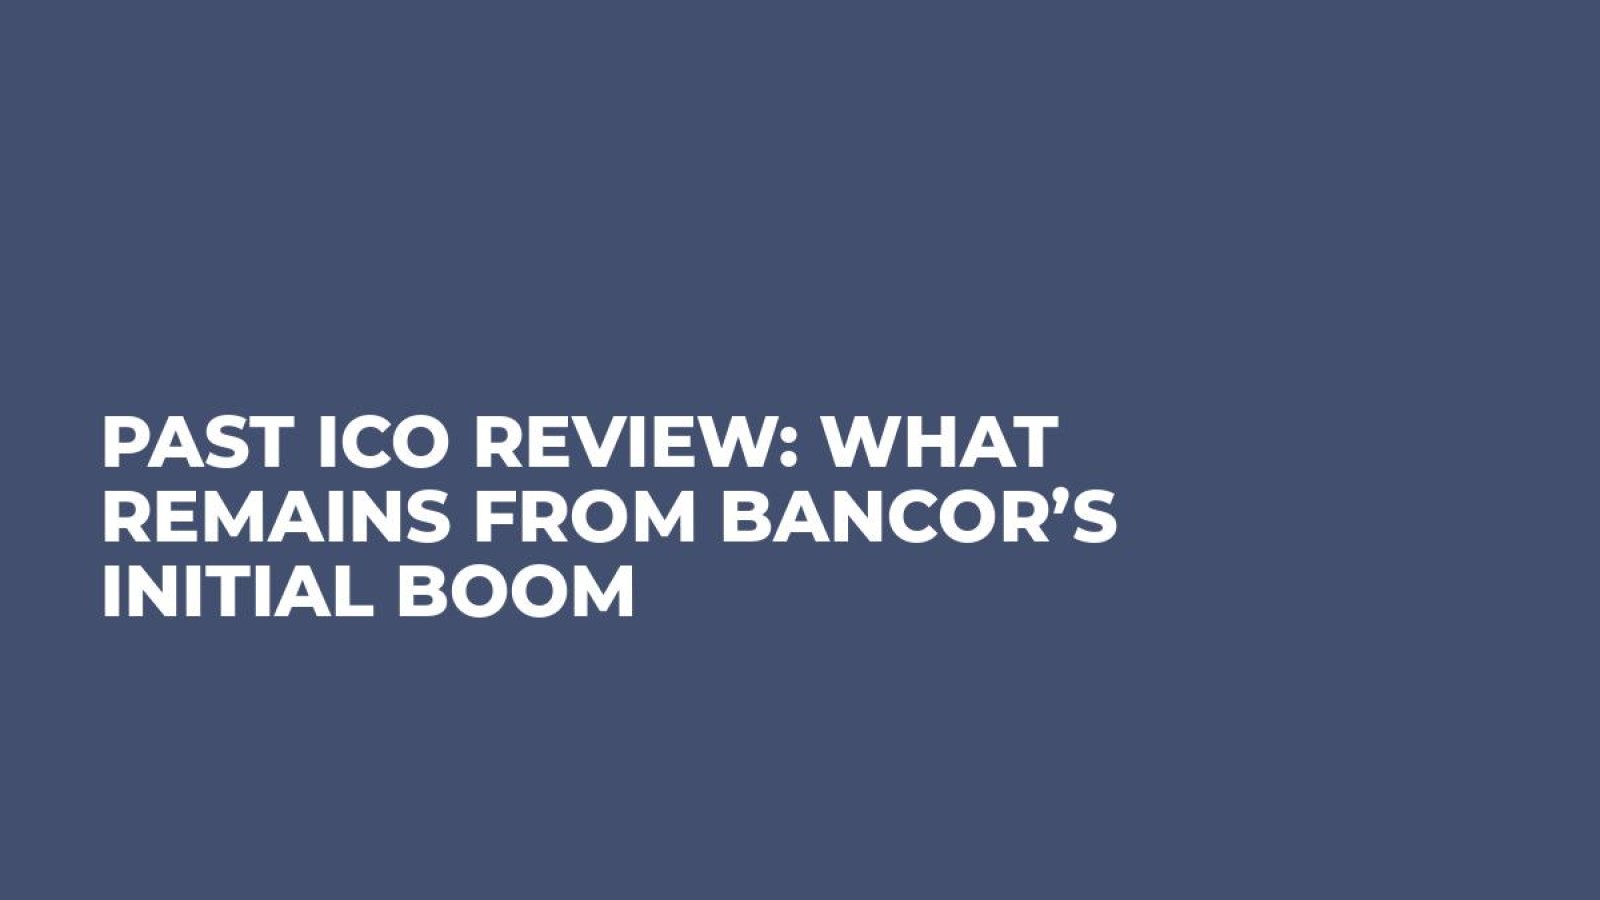 Past ICO Review: What Remains From Bancor’s Initial Boom